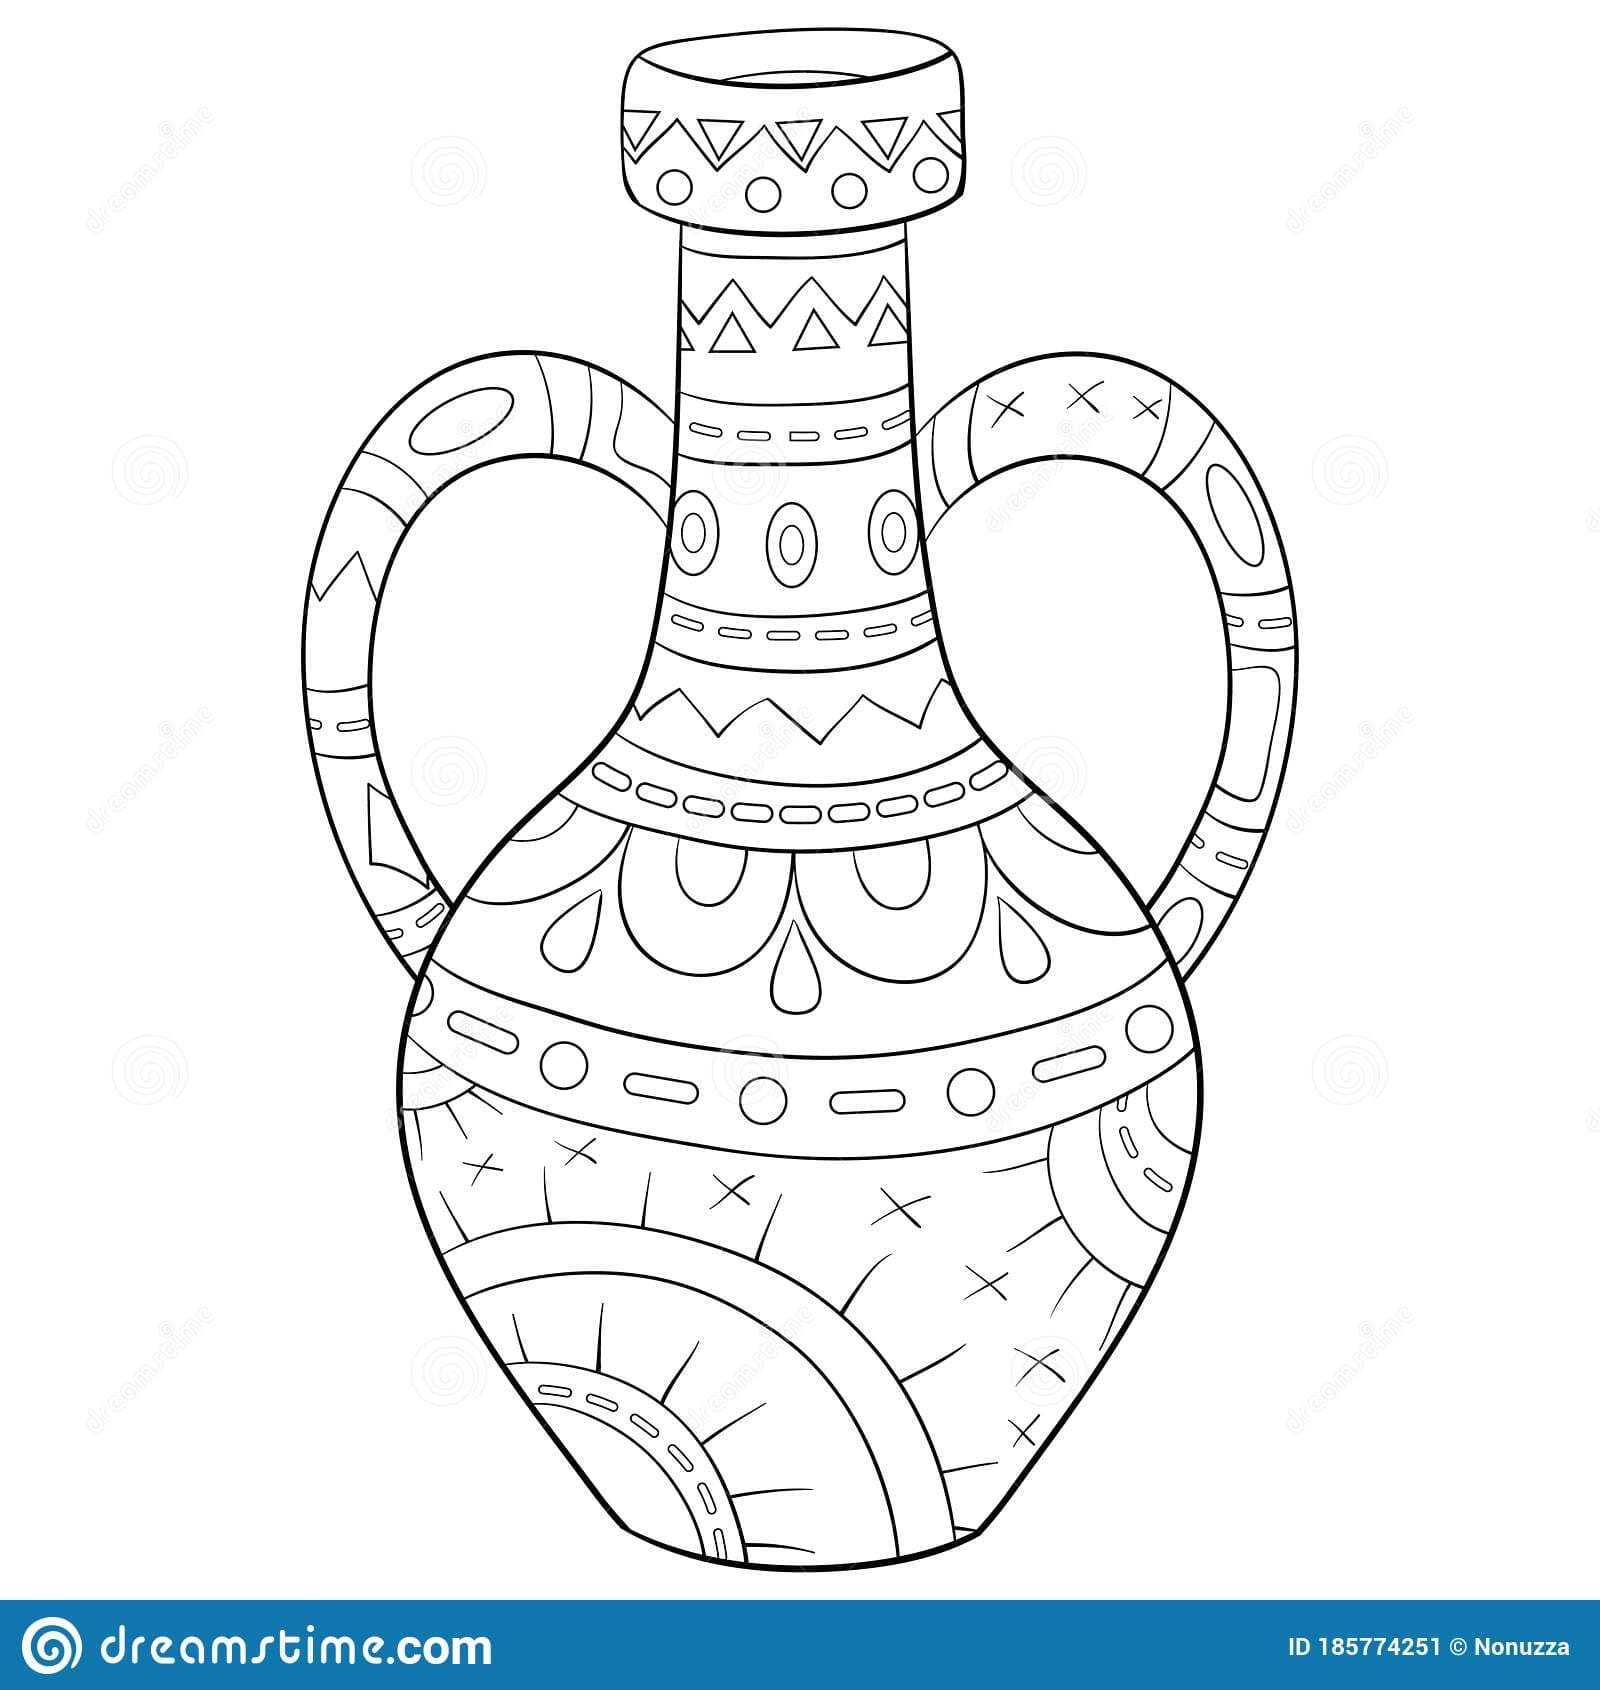 Vase With Flowers Picture For Children Coloring Page